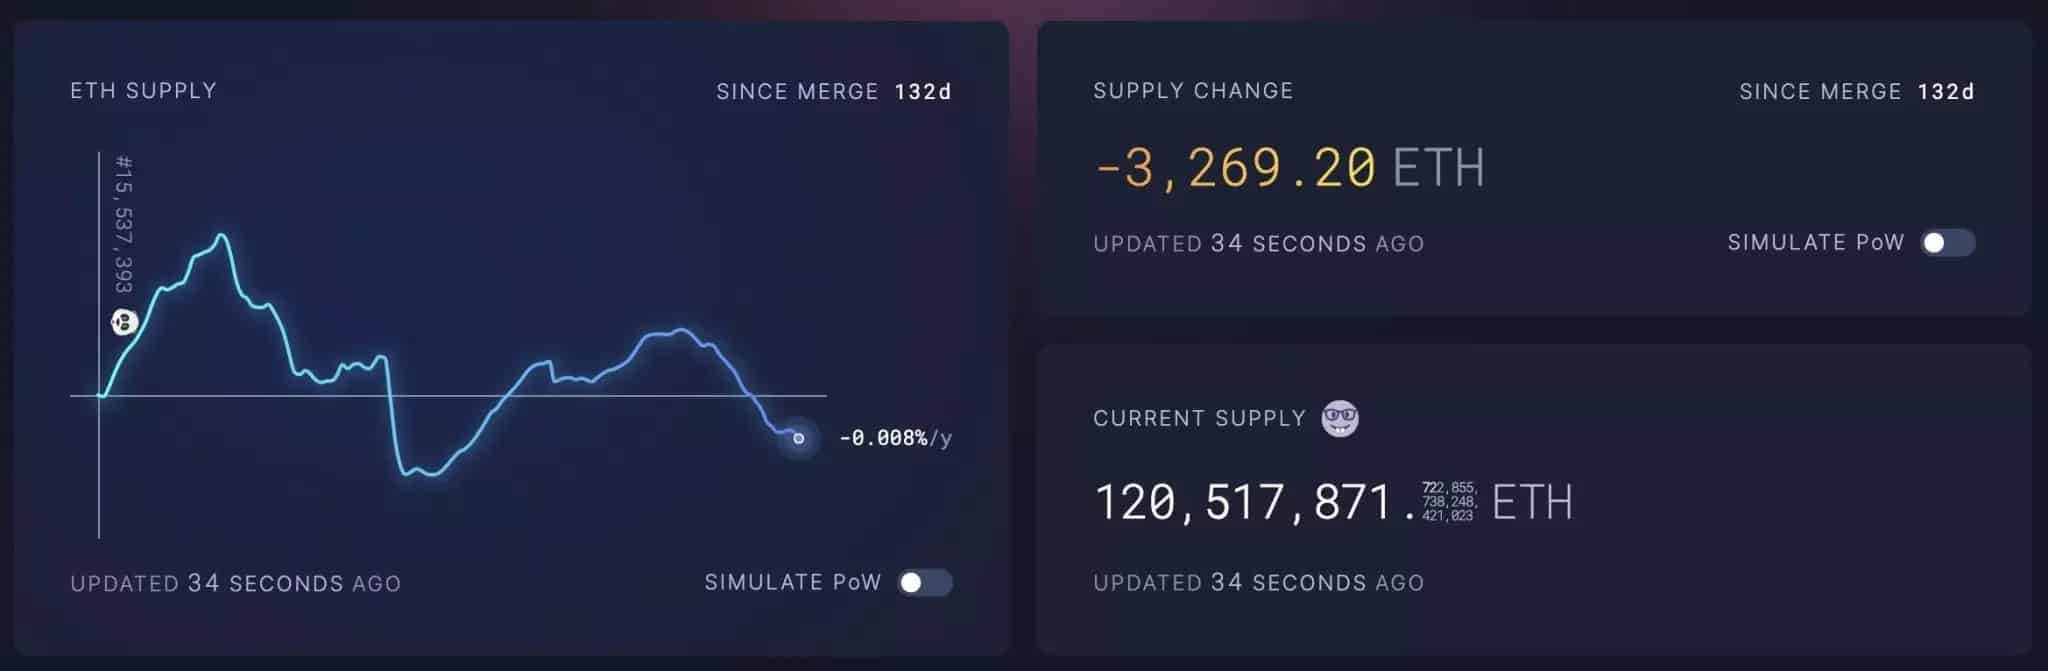 ETH supply reduction since The Merge